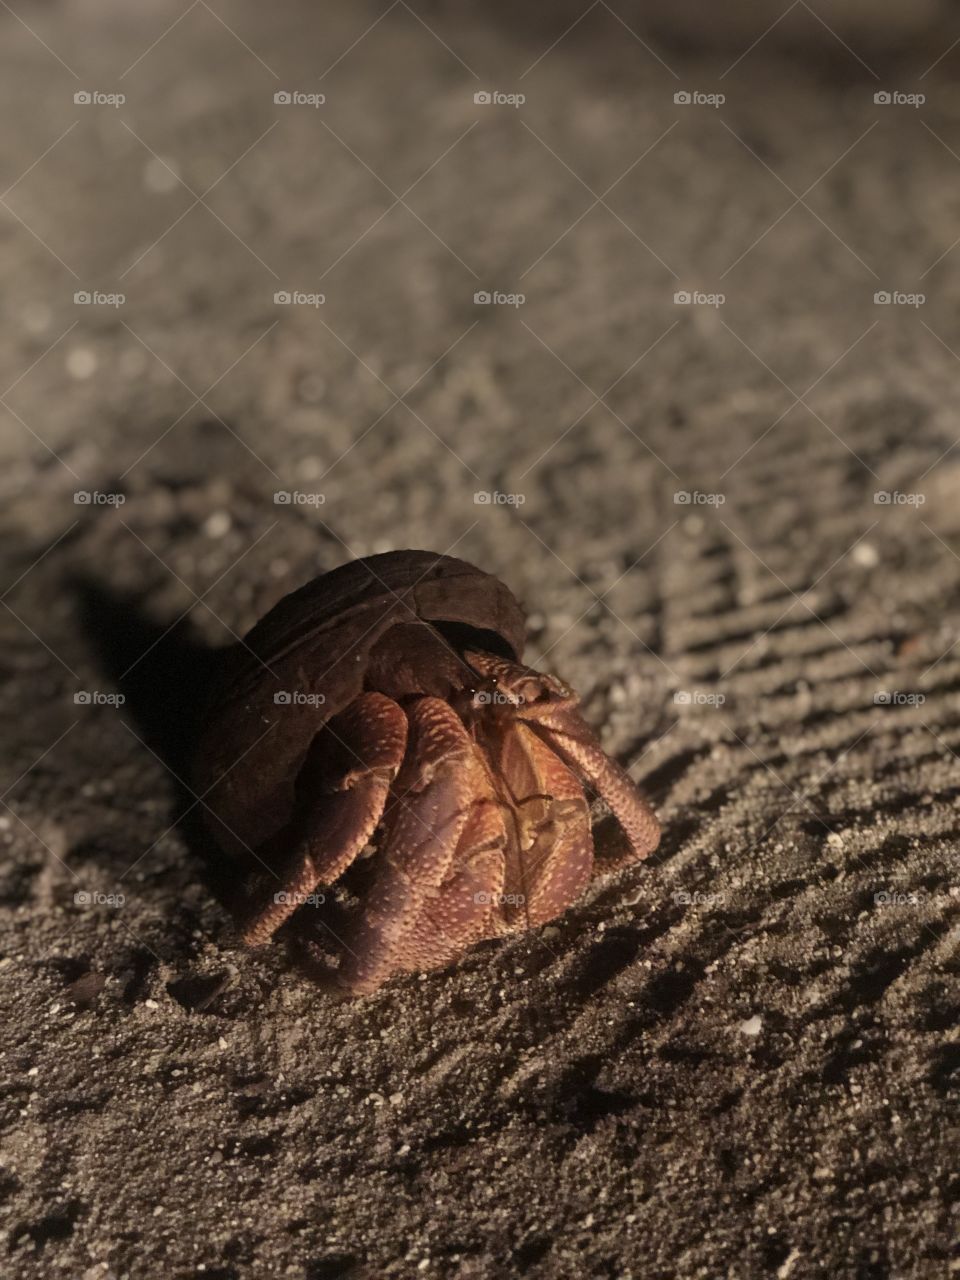 Coconut shell was used as a dress or cover by nice red hermit crab in the full moon night of 18th June 2019. 